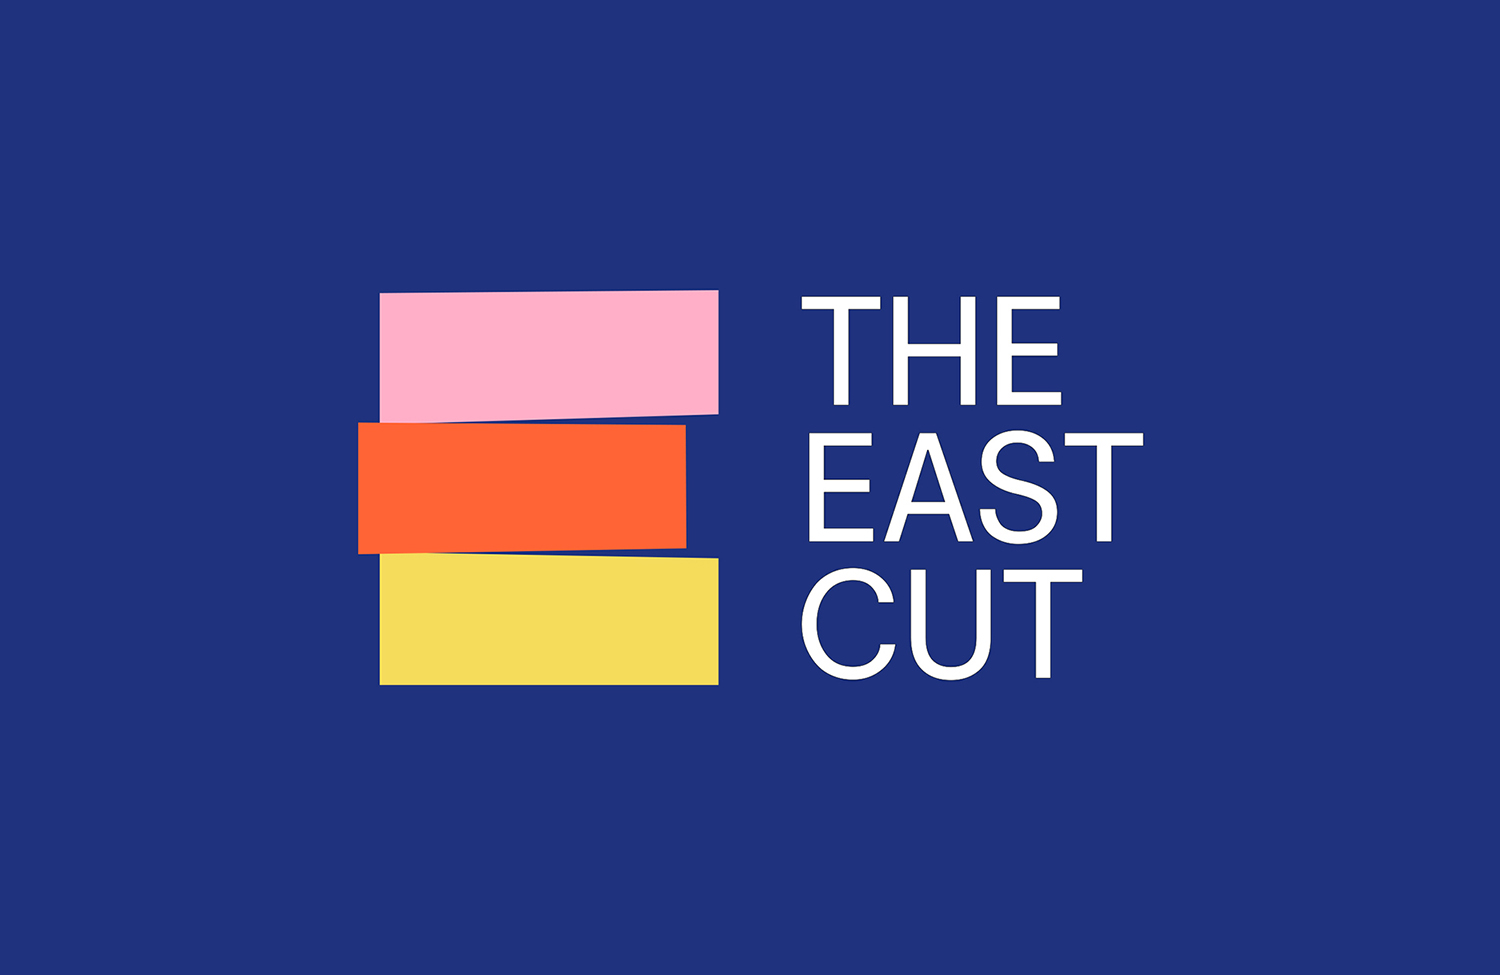 Logo designed by Collins for the new San Francisco neighbourhood of The East Cut